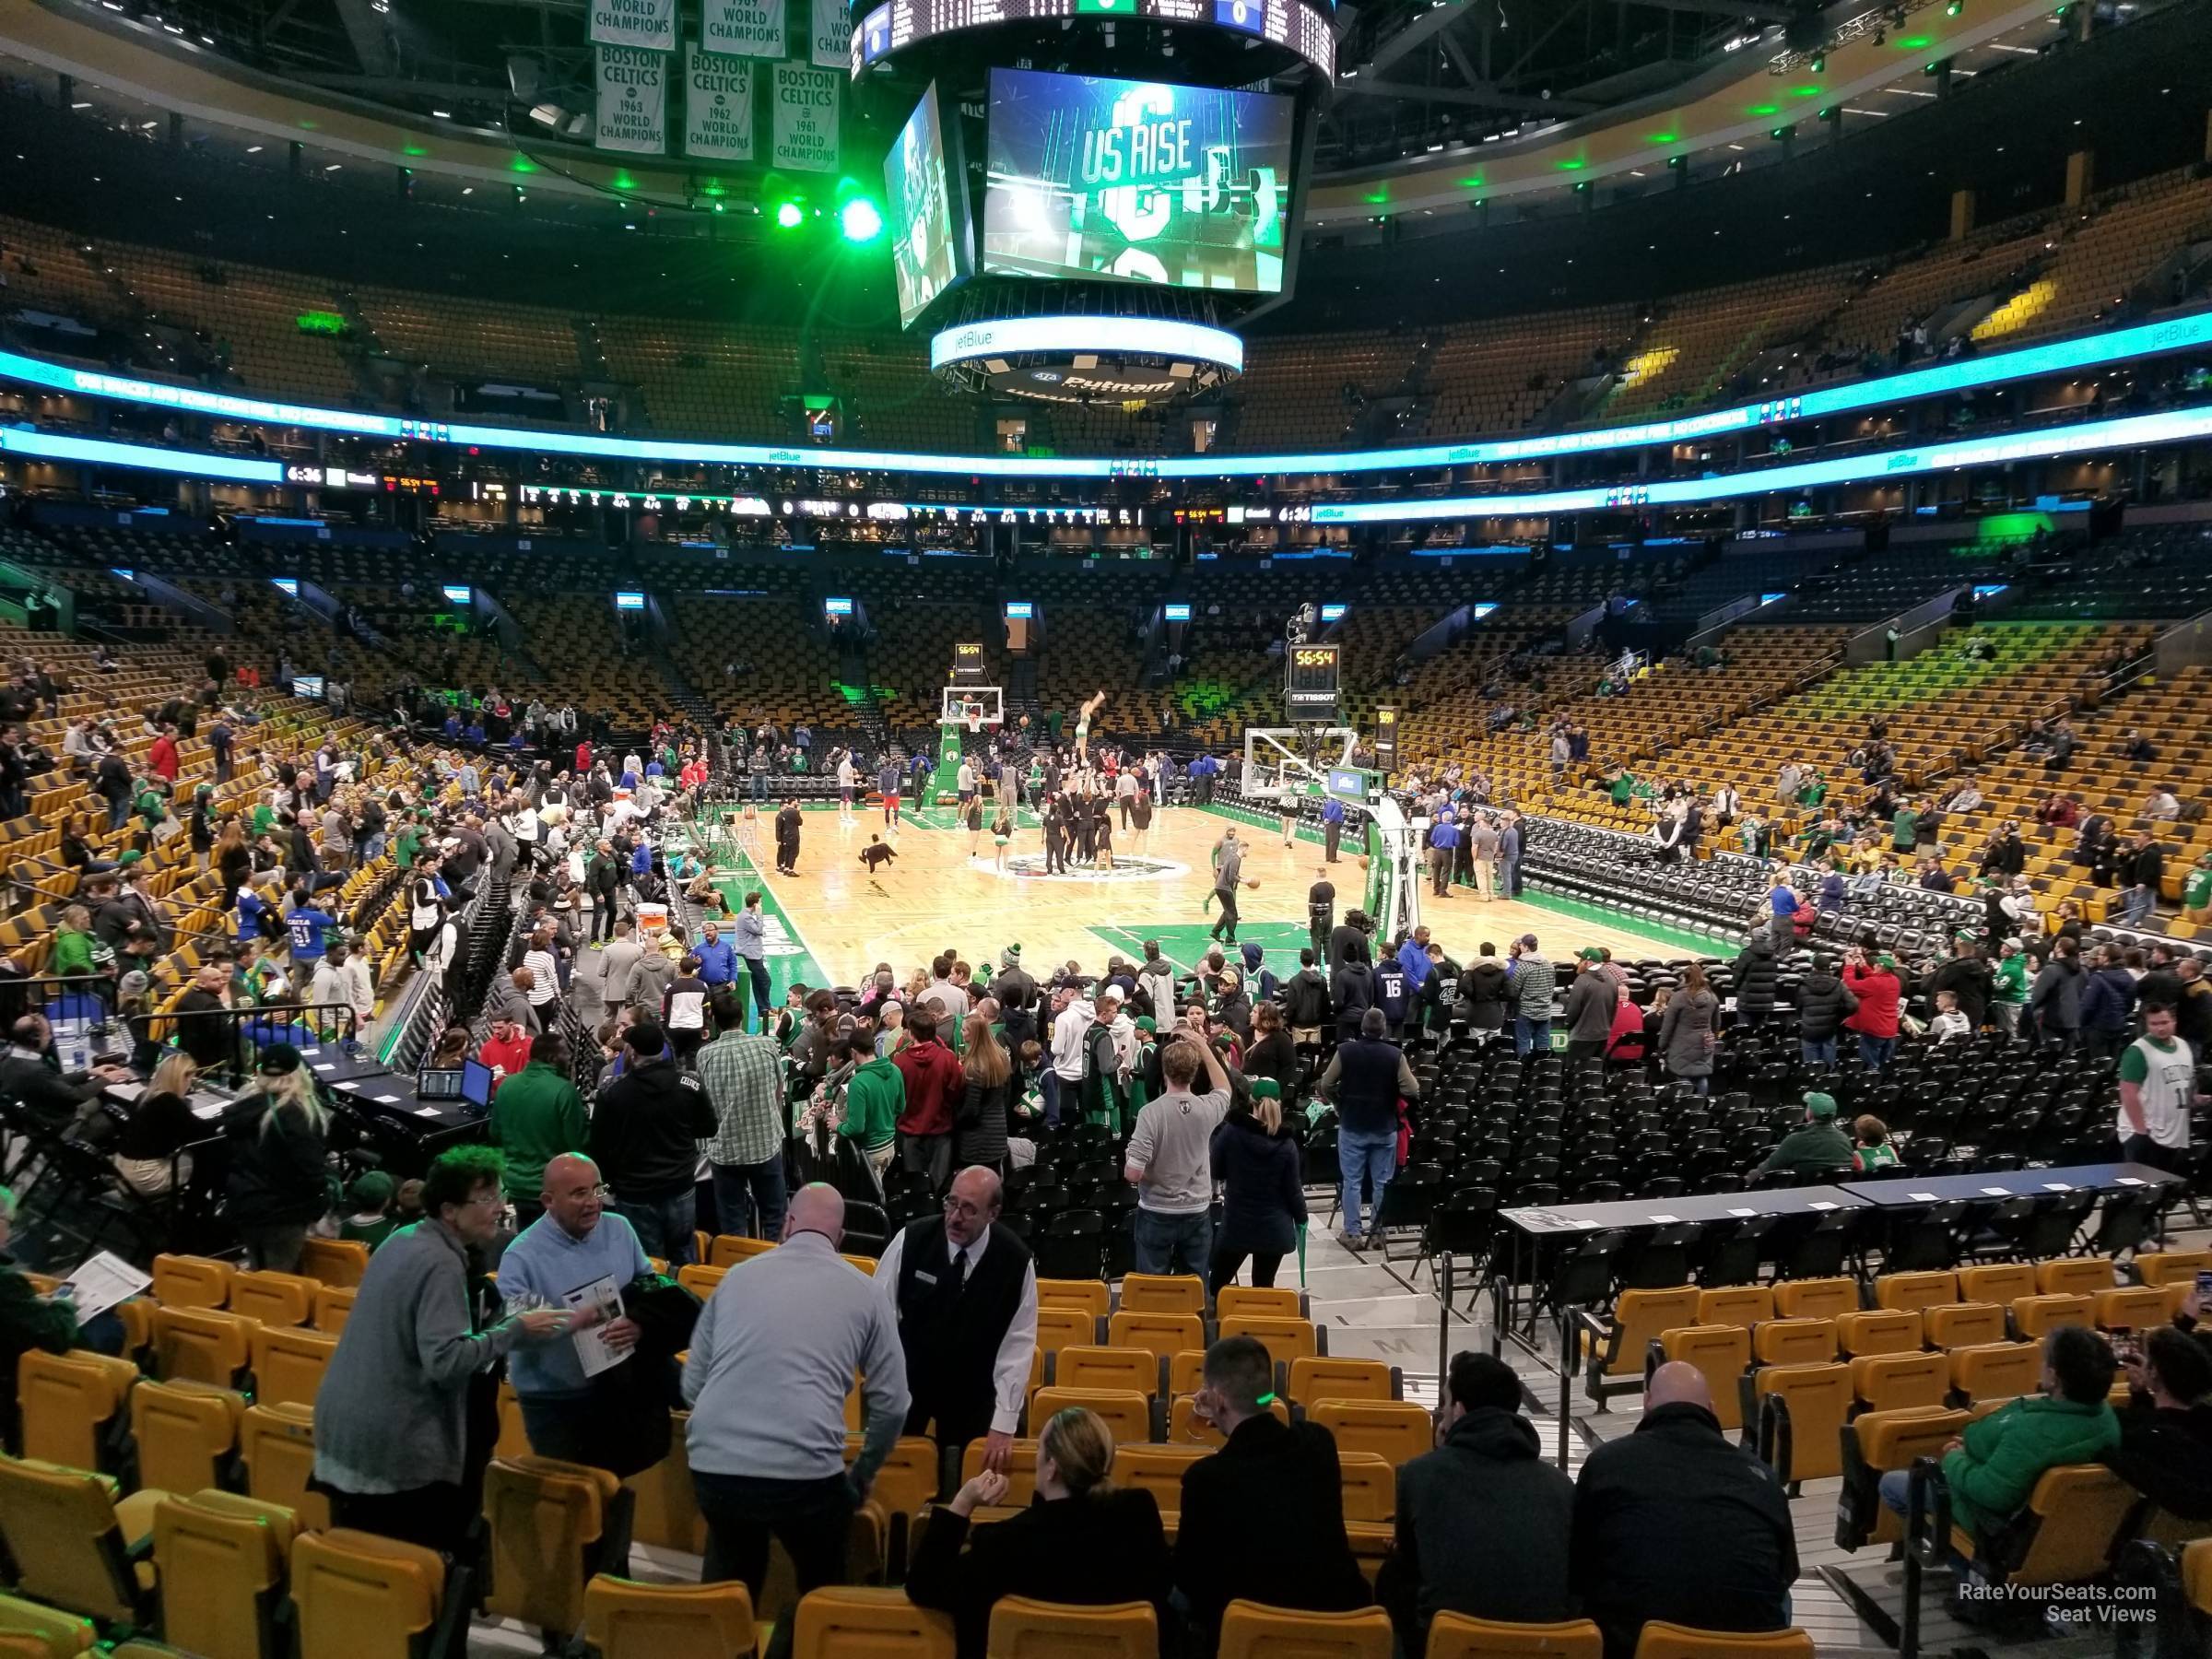 loge 18, row 13 seat view  for basketball - td garden